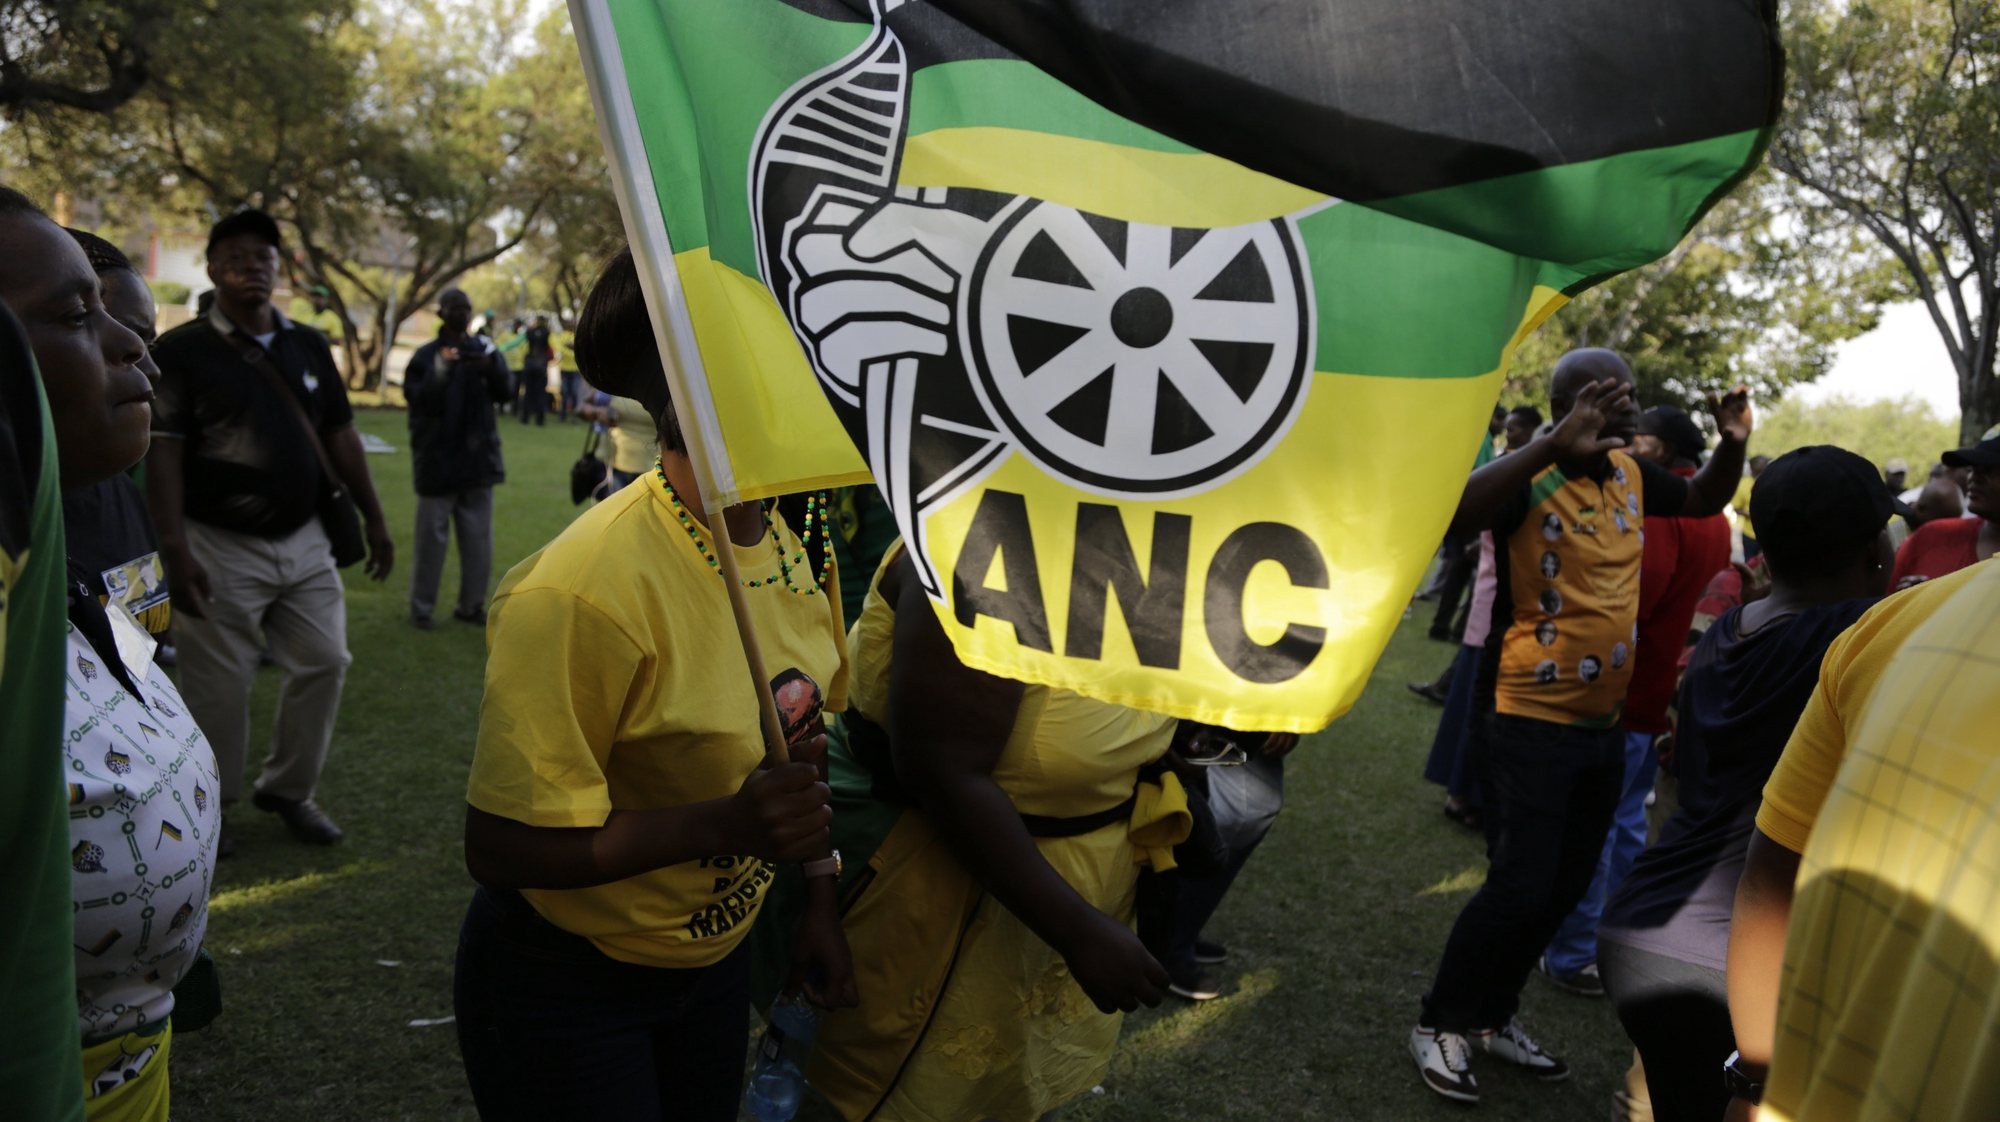 epa06393698 Supporters of deputy President Cyril Ramaphosa wave an ANC flag in his support during the 54th ANC National Conference held at the NASREC Convention Centre, Johannesburg , South Africa, 16 December 2017. The ruling ANC led by its President and President of South Africa, Jacob Zuma, has been reeling recently under allegations of corruption and and loss of support from its core voters. The ANC (African National Congress) formally led by Nelson Mandela led the country to freedom from white rule and the Apartheid system during the first free and fair elections in 1994. The convention continues for five days.  EPA/Cornell Tukiri